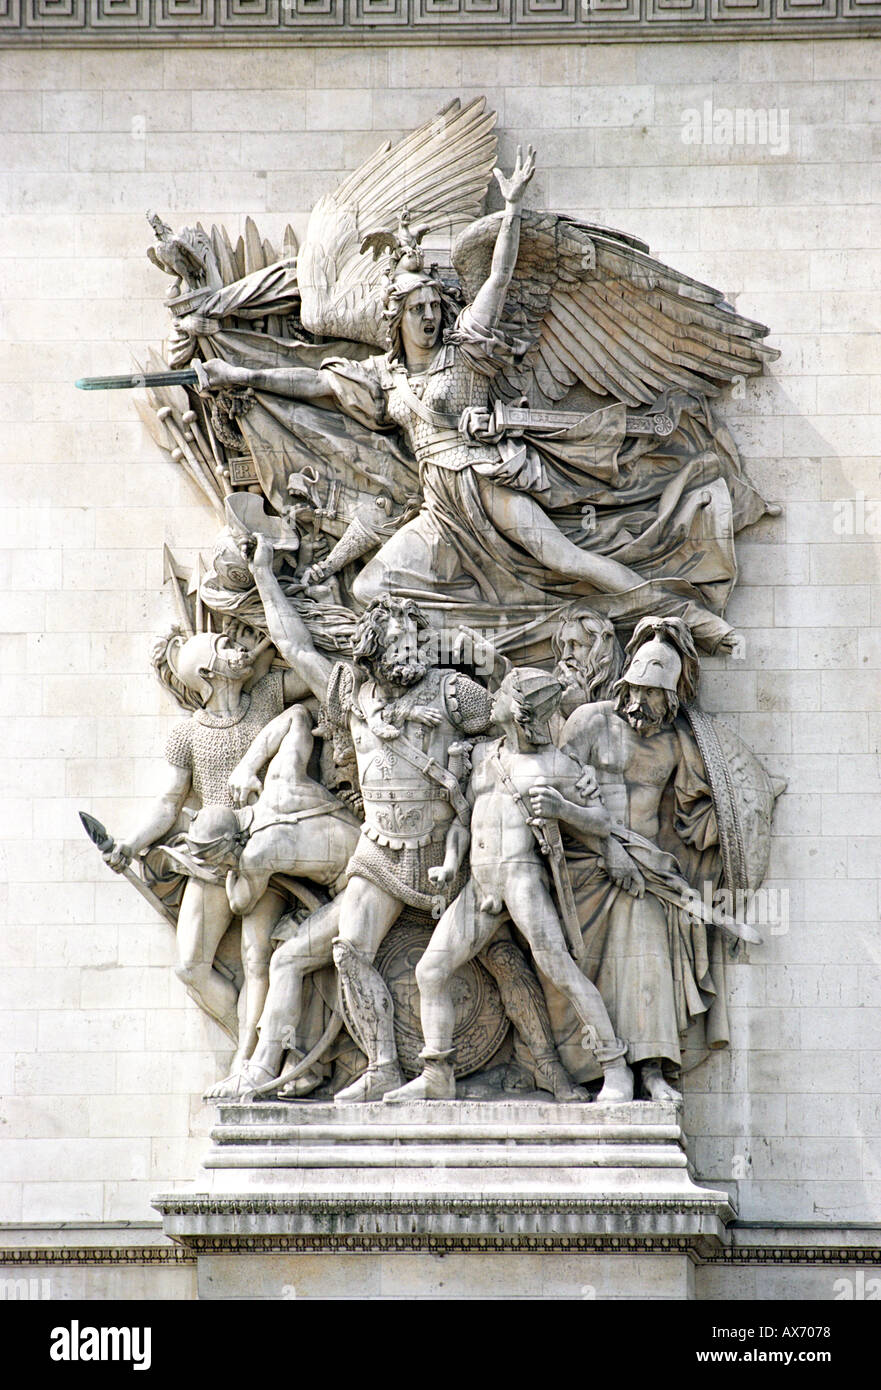 Close up of a carving on the front of The Arc de Triomphe in Paris